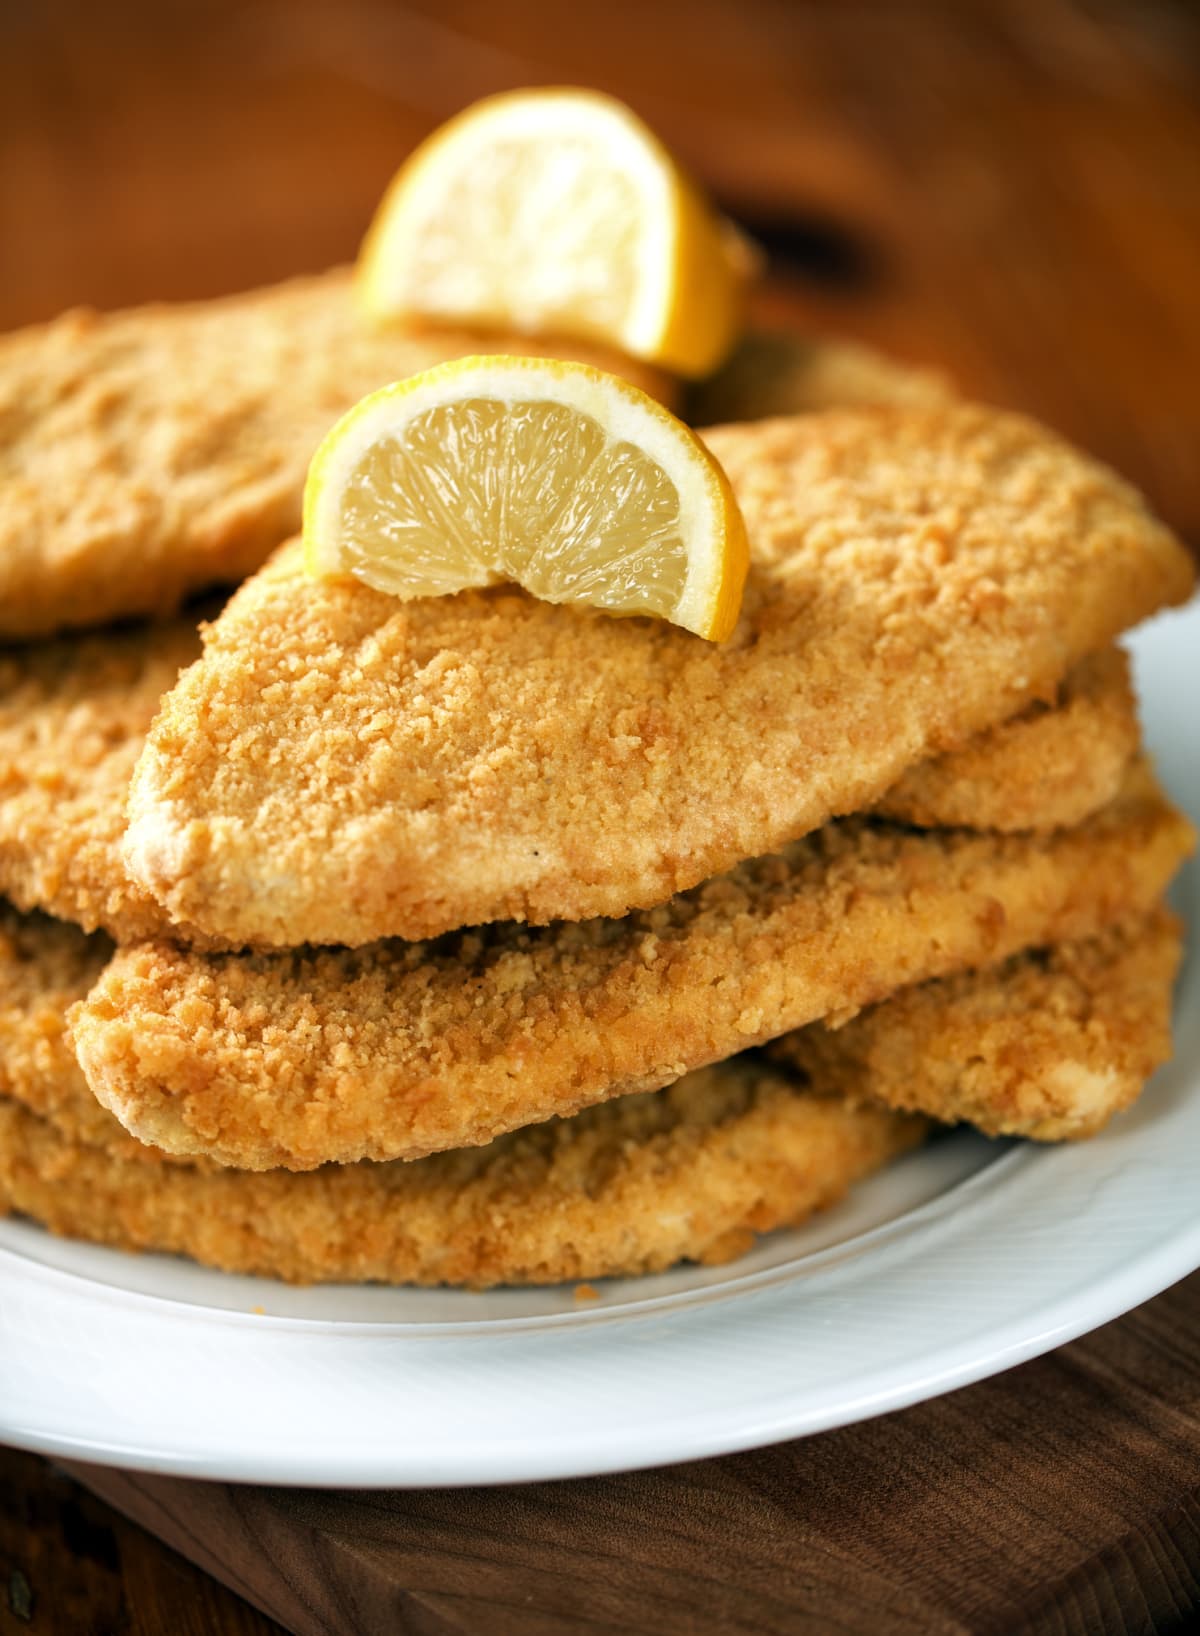 Milanese cutlet with orange slices